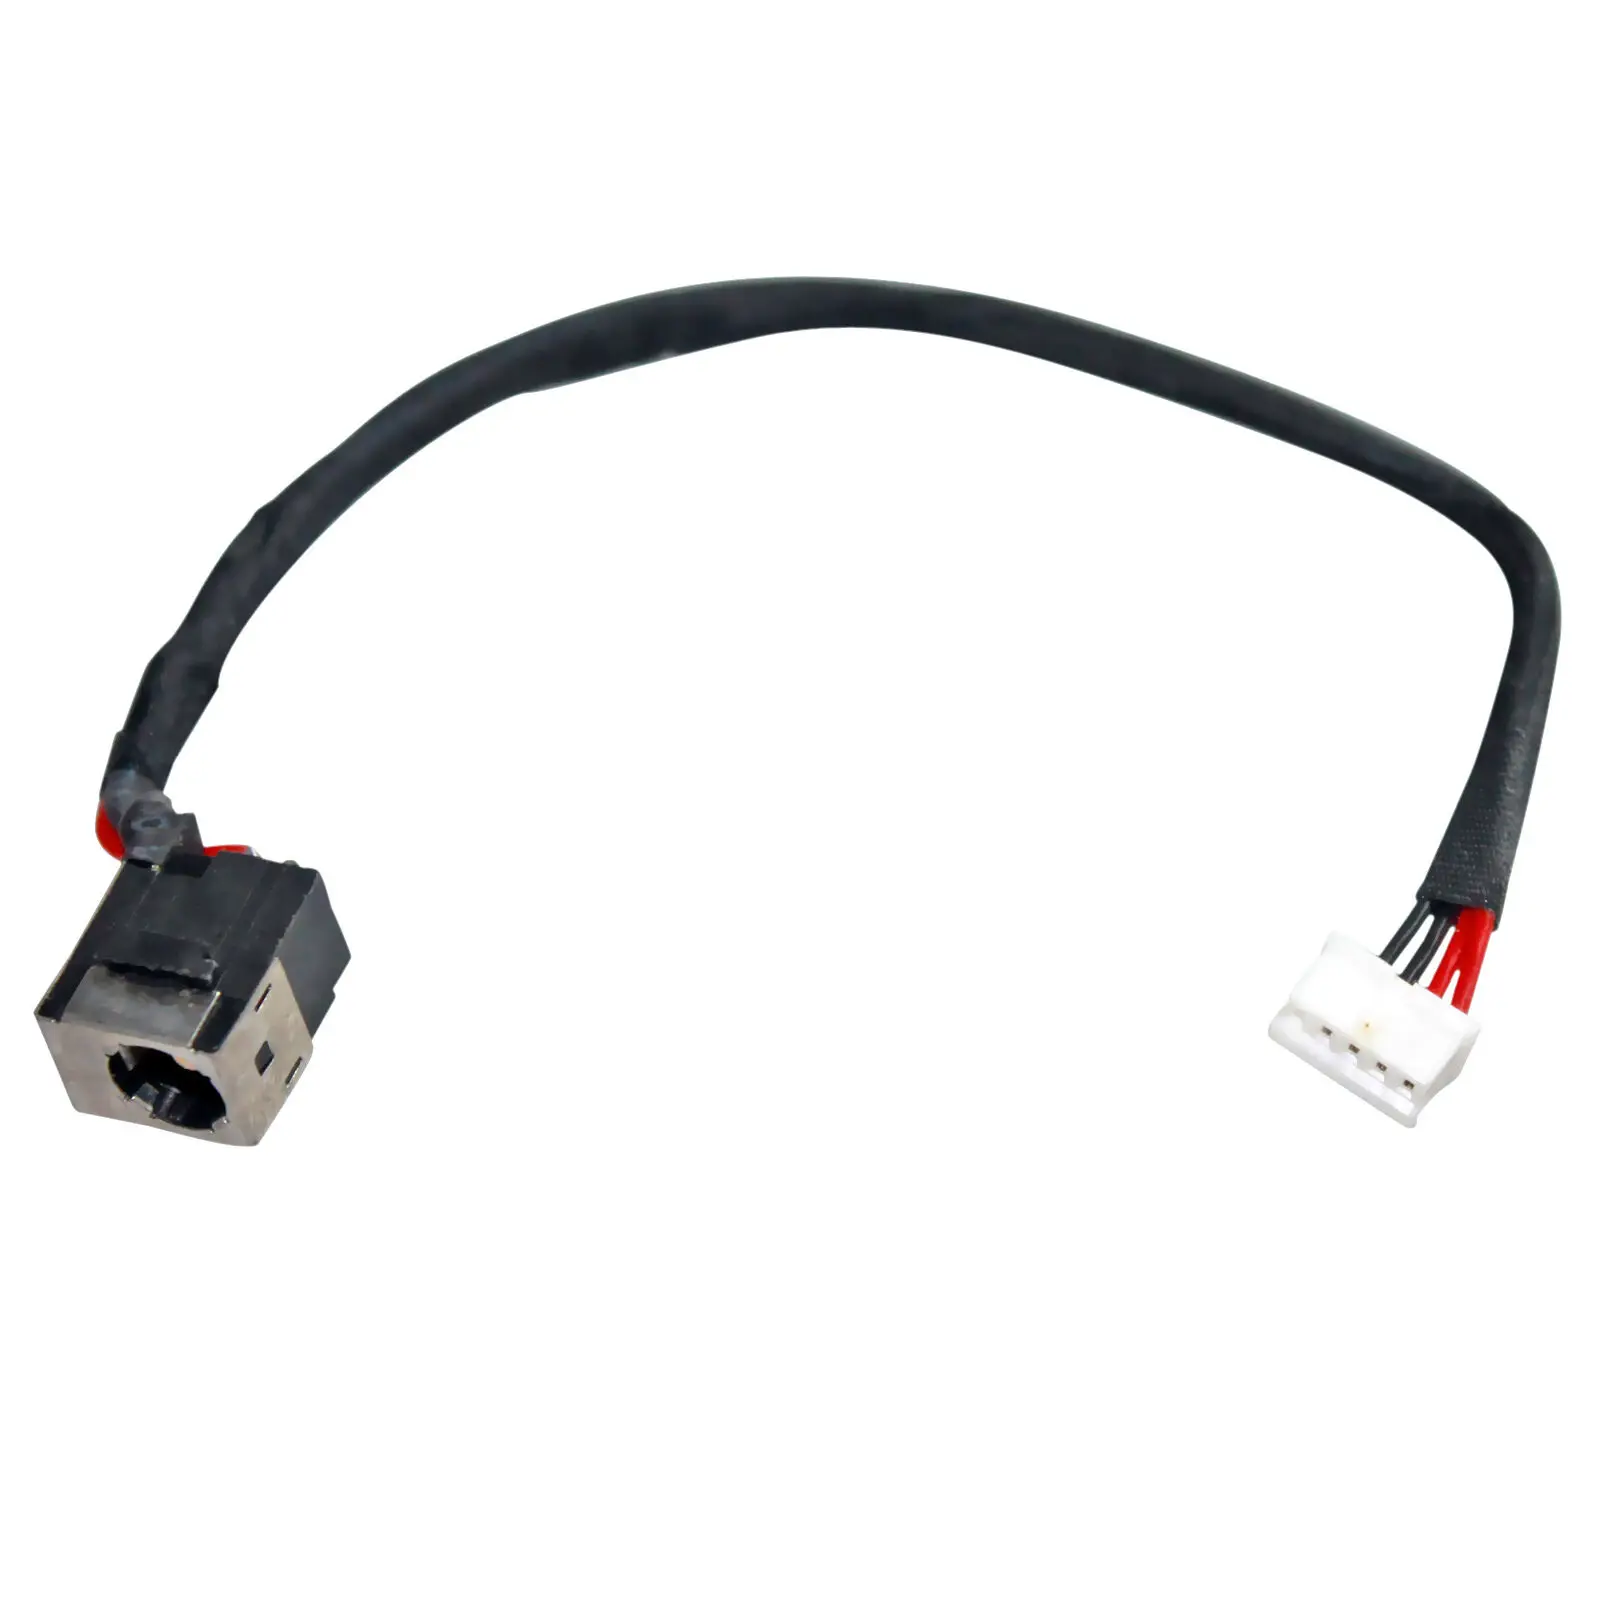 

for Lenovo IdeaPad Y460t Y560 Y560A Y560D Y560P AC DC IN Power Jack Harnes Cable